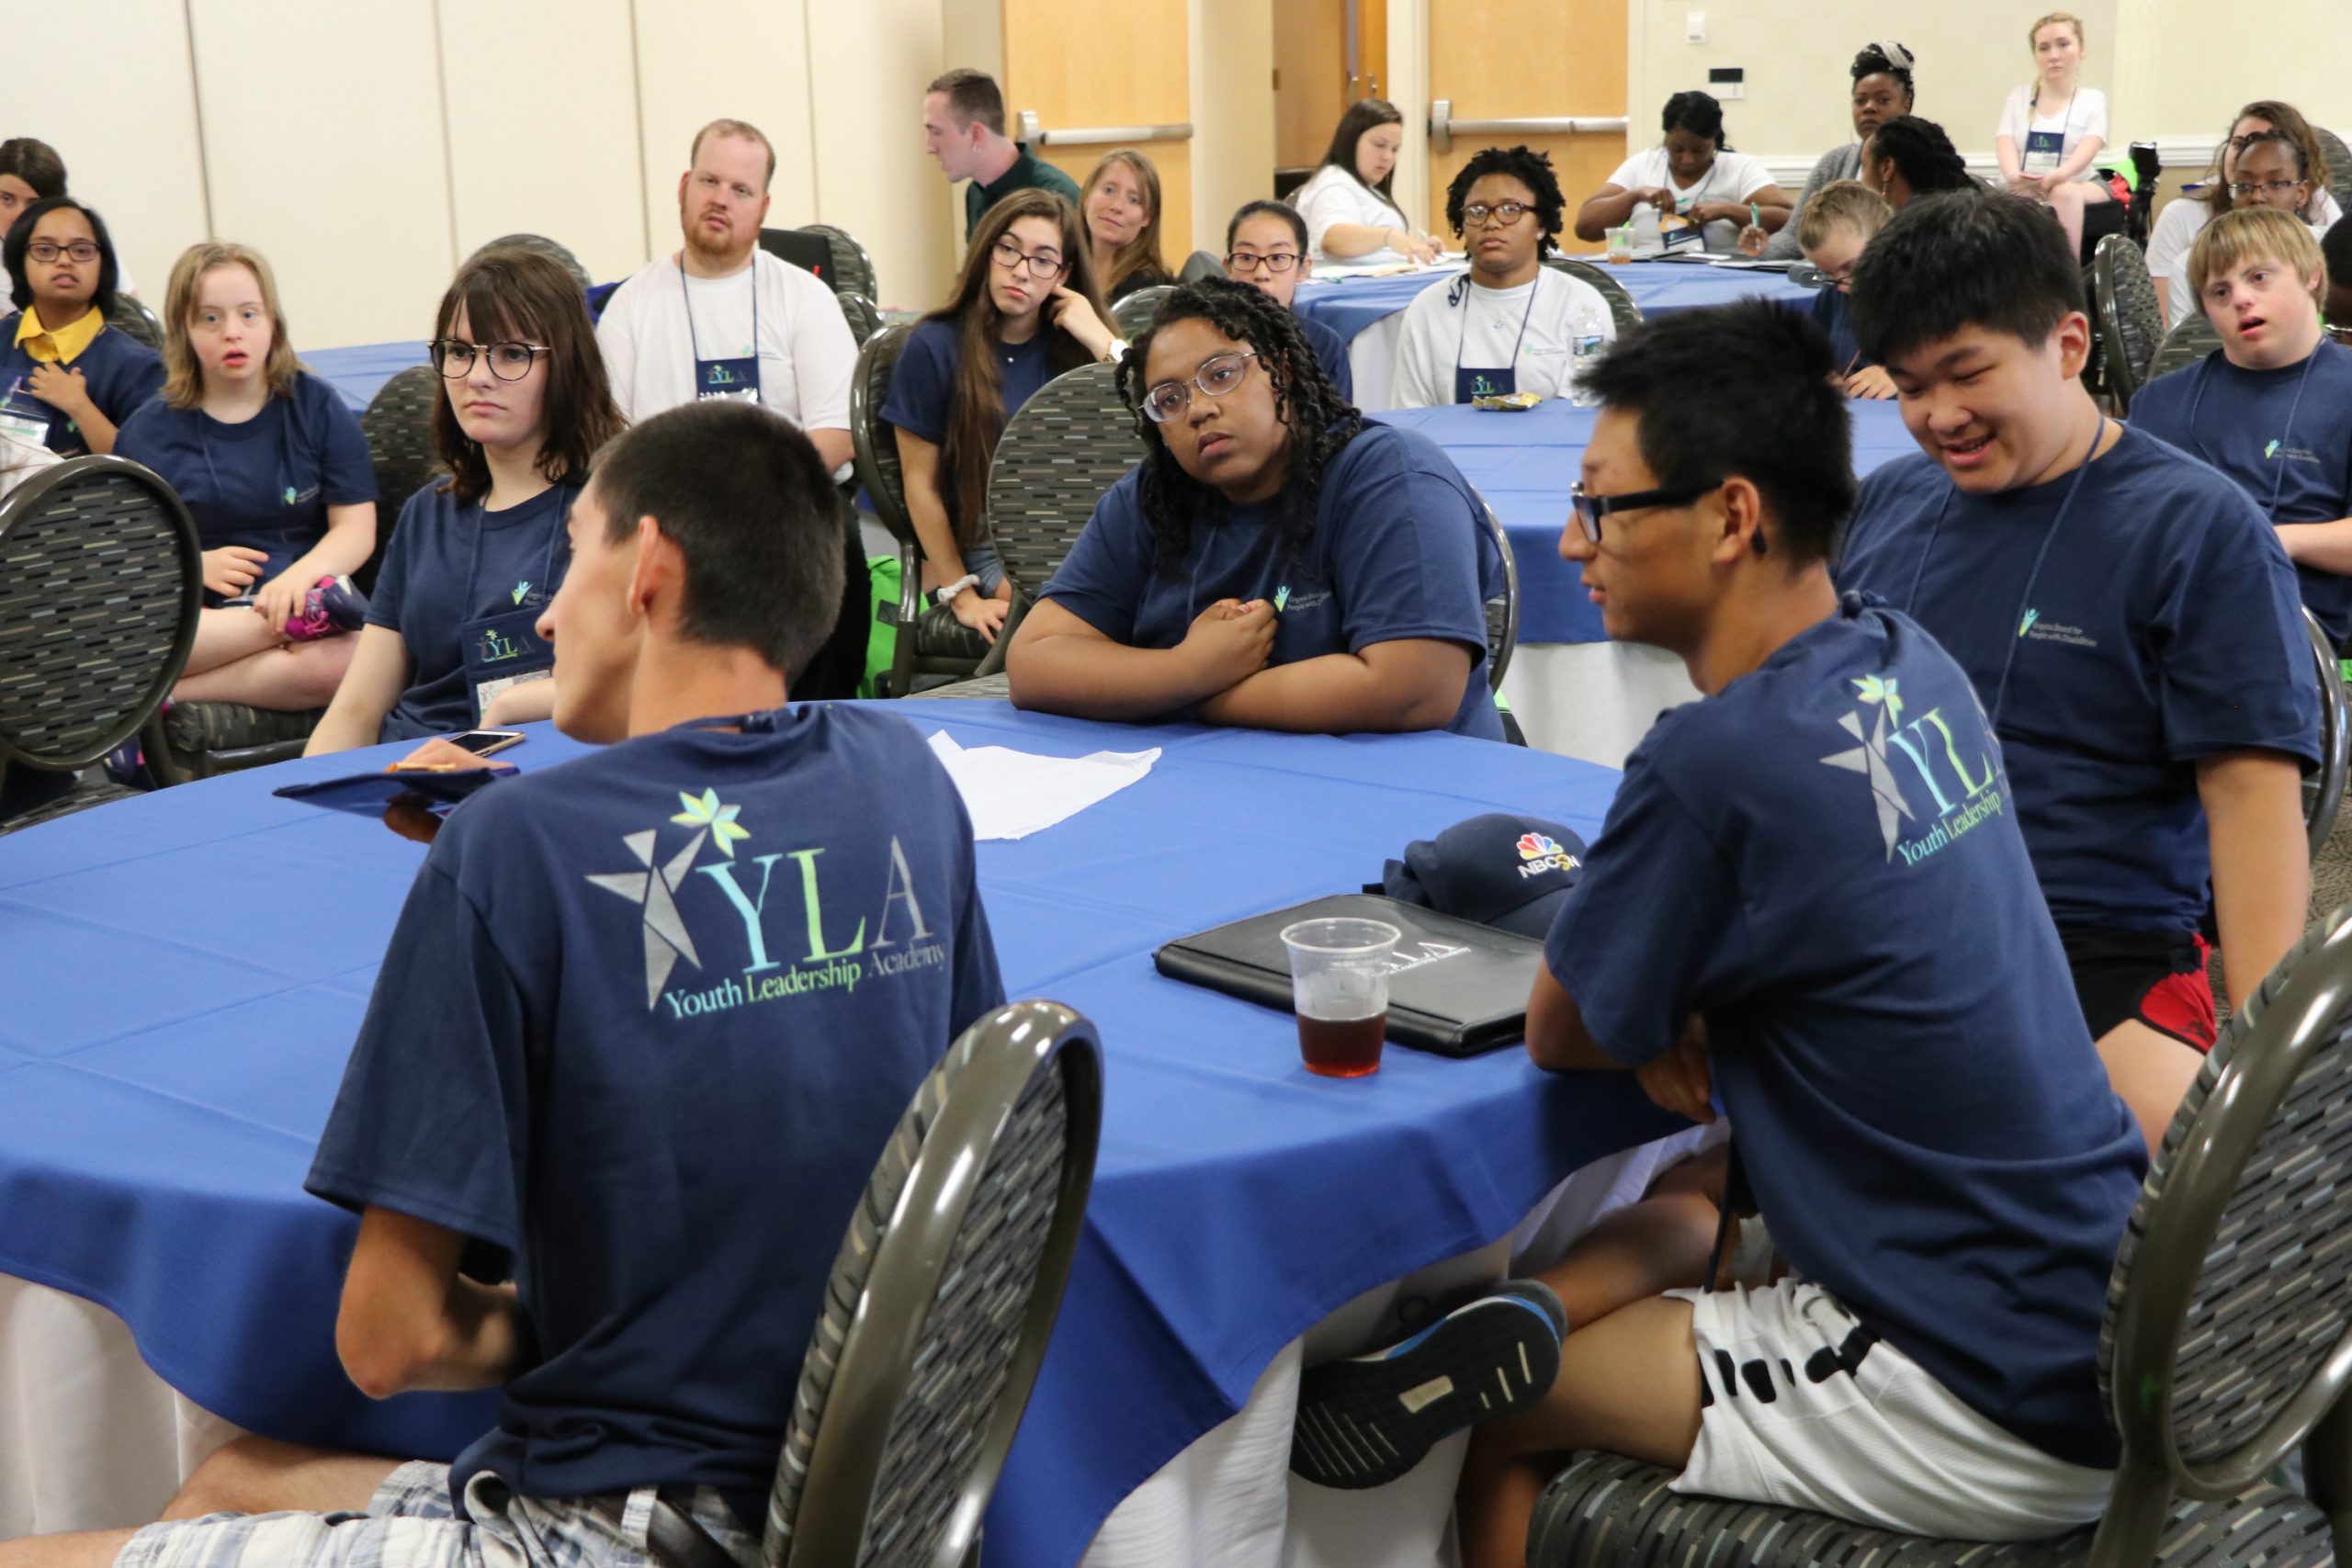 Students in matching YLA tee shirts sitting around a blue conference table